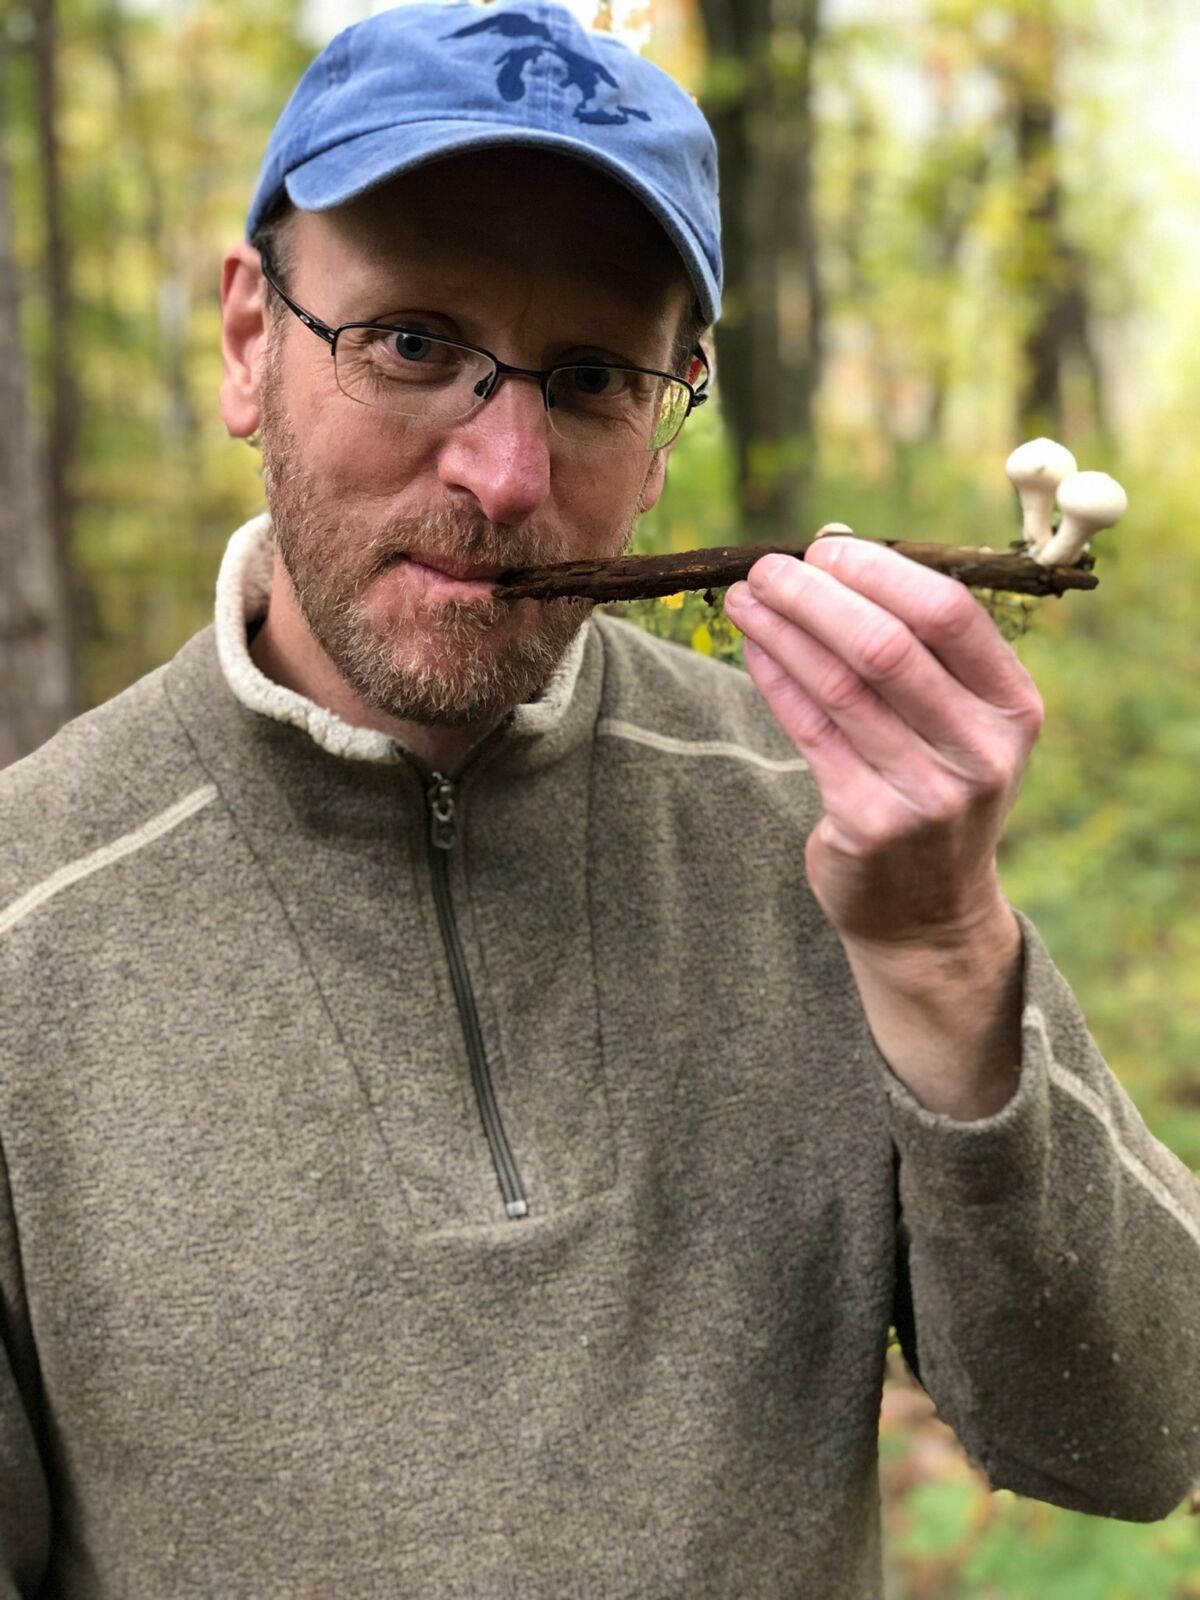 Andrew Lidral, wearing a hat and glasses, holds a stick with two mushrooms growing on the end like a pipe.